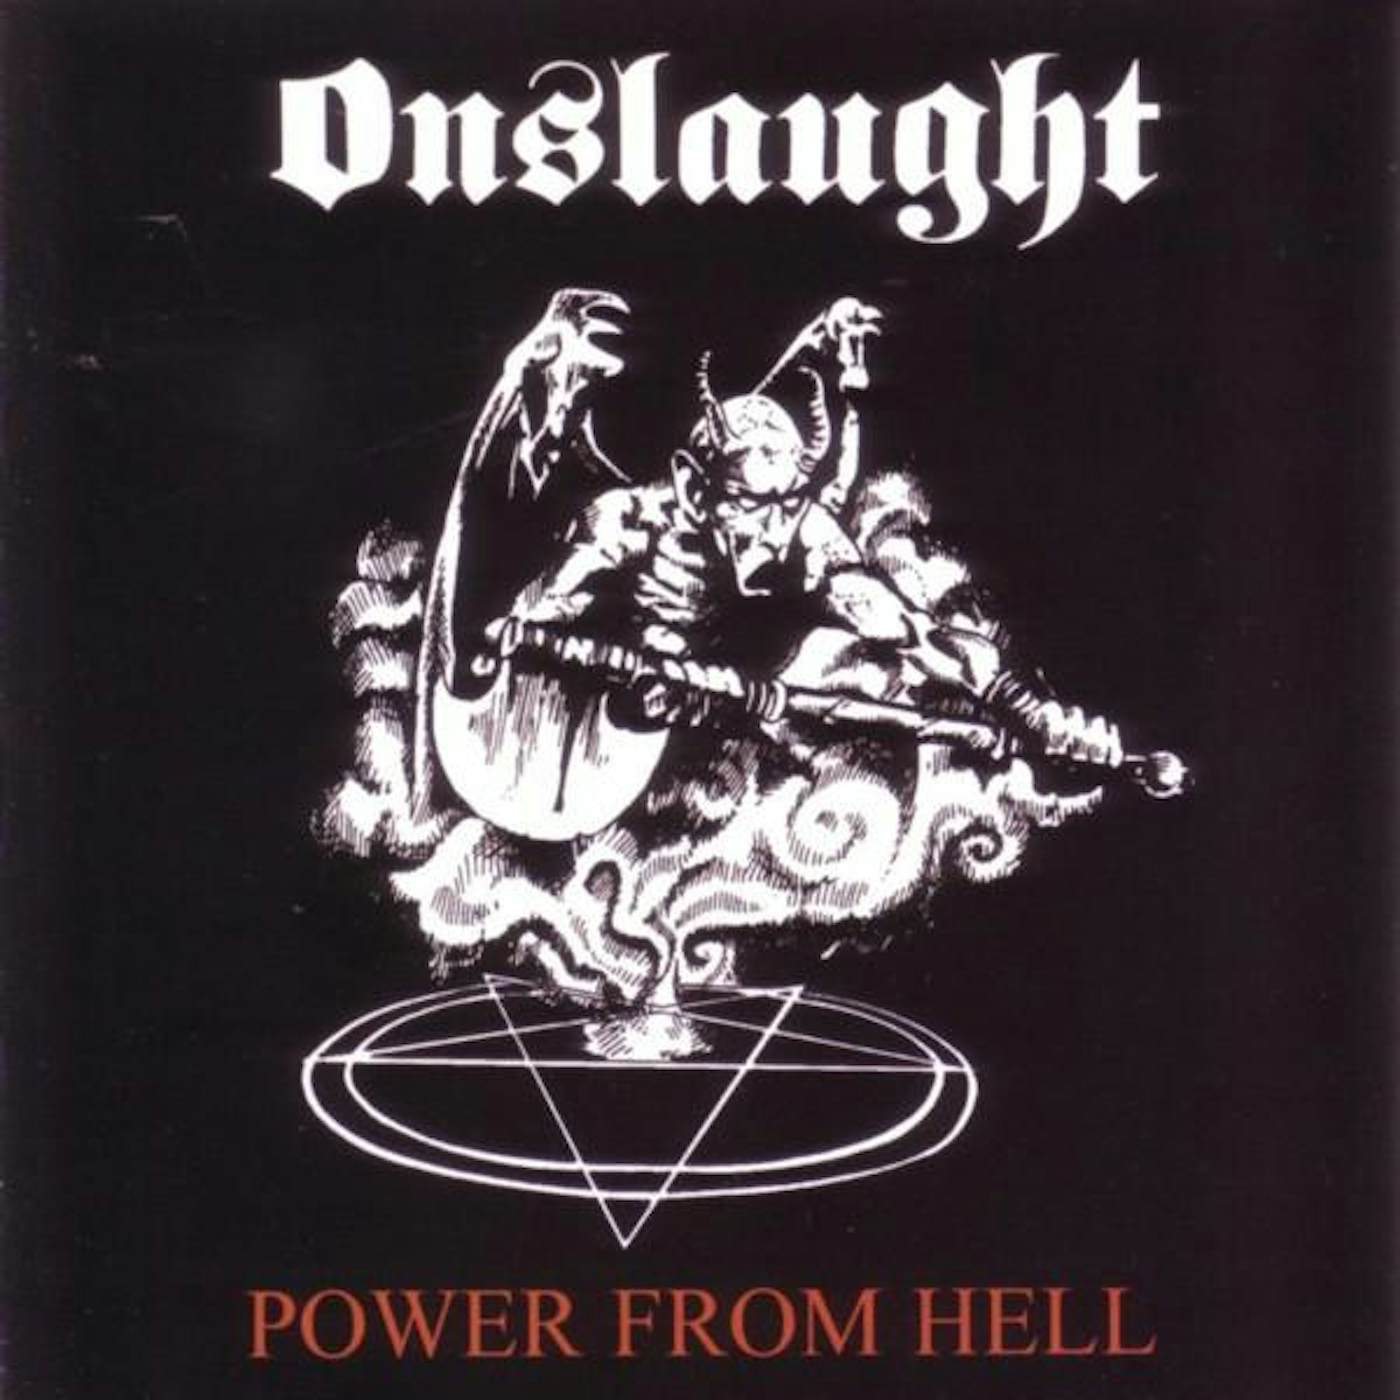 Onslaught POWER FROM HELL CD